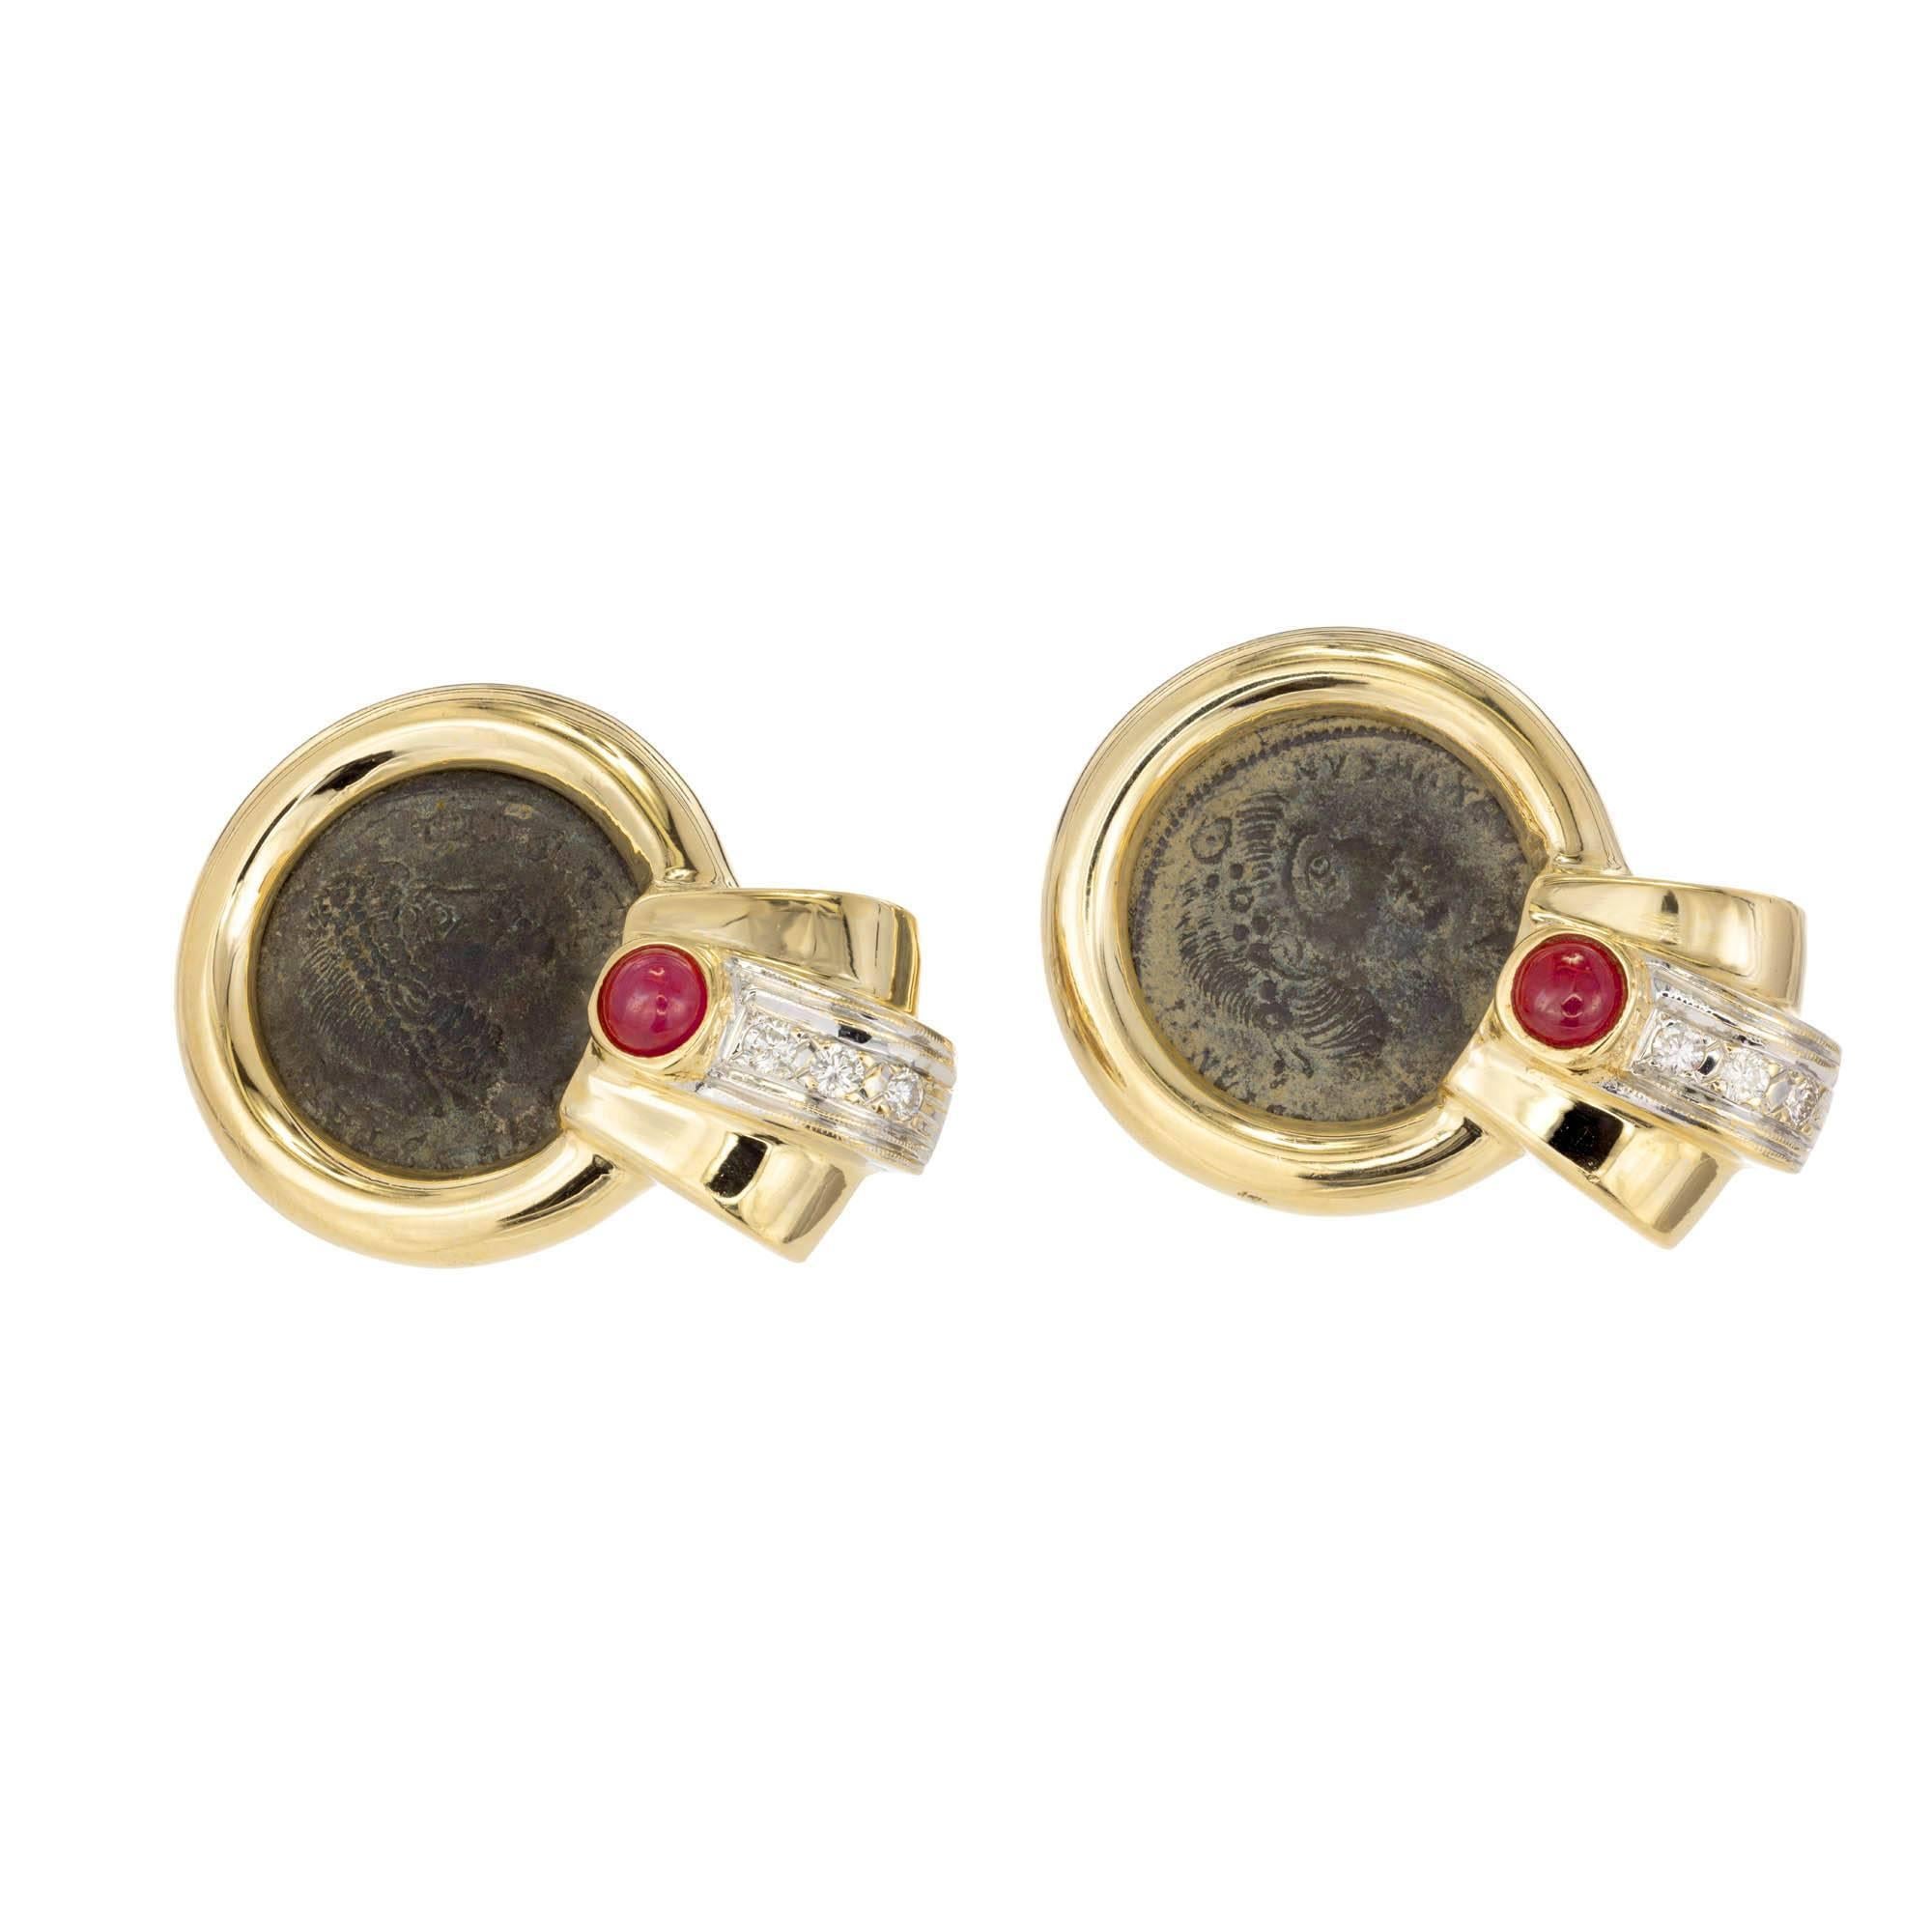 14k yellow gold coin dangle earrings with rubies and diamonds. Roman coin is bezel set in a wide yellow gold bezel with a stepped flare bottom set with a cabochon ruby and round brilliant cut diamond.

2 round cabochon rubies 4mm Approximate .50